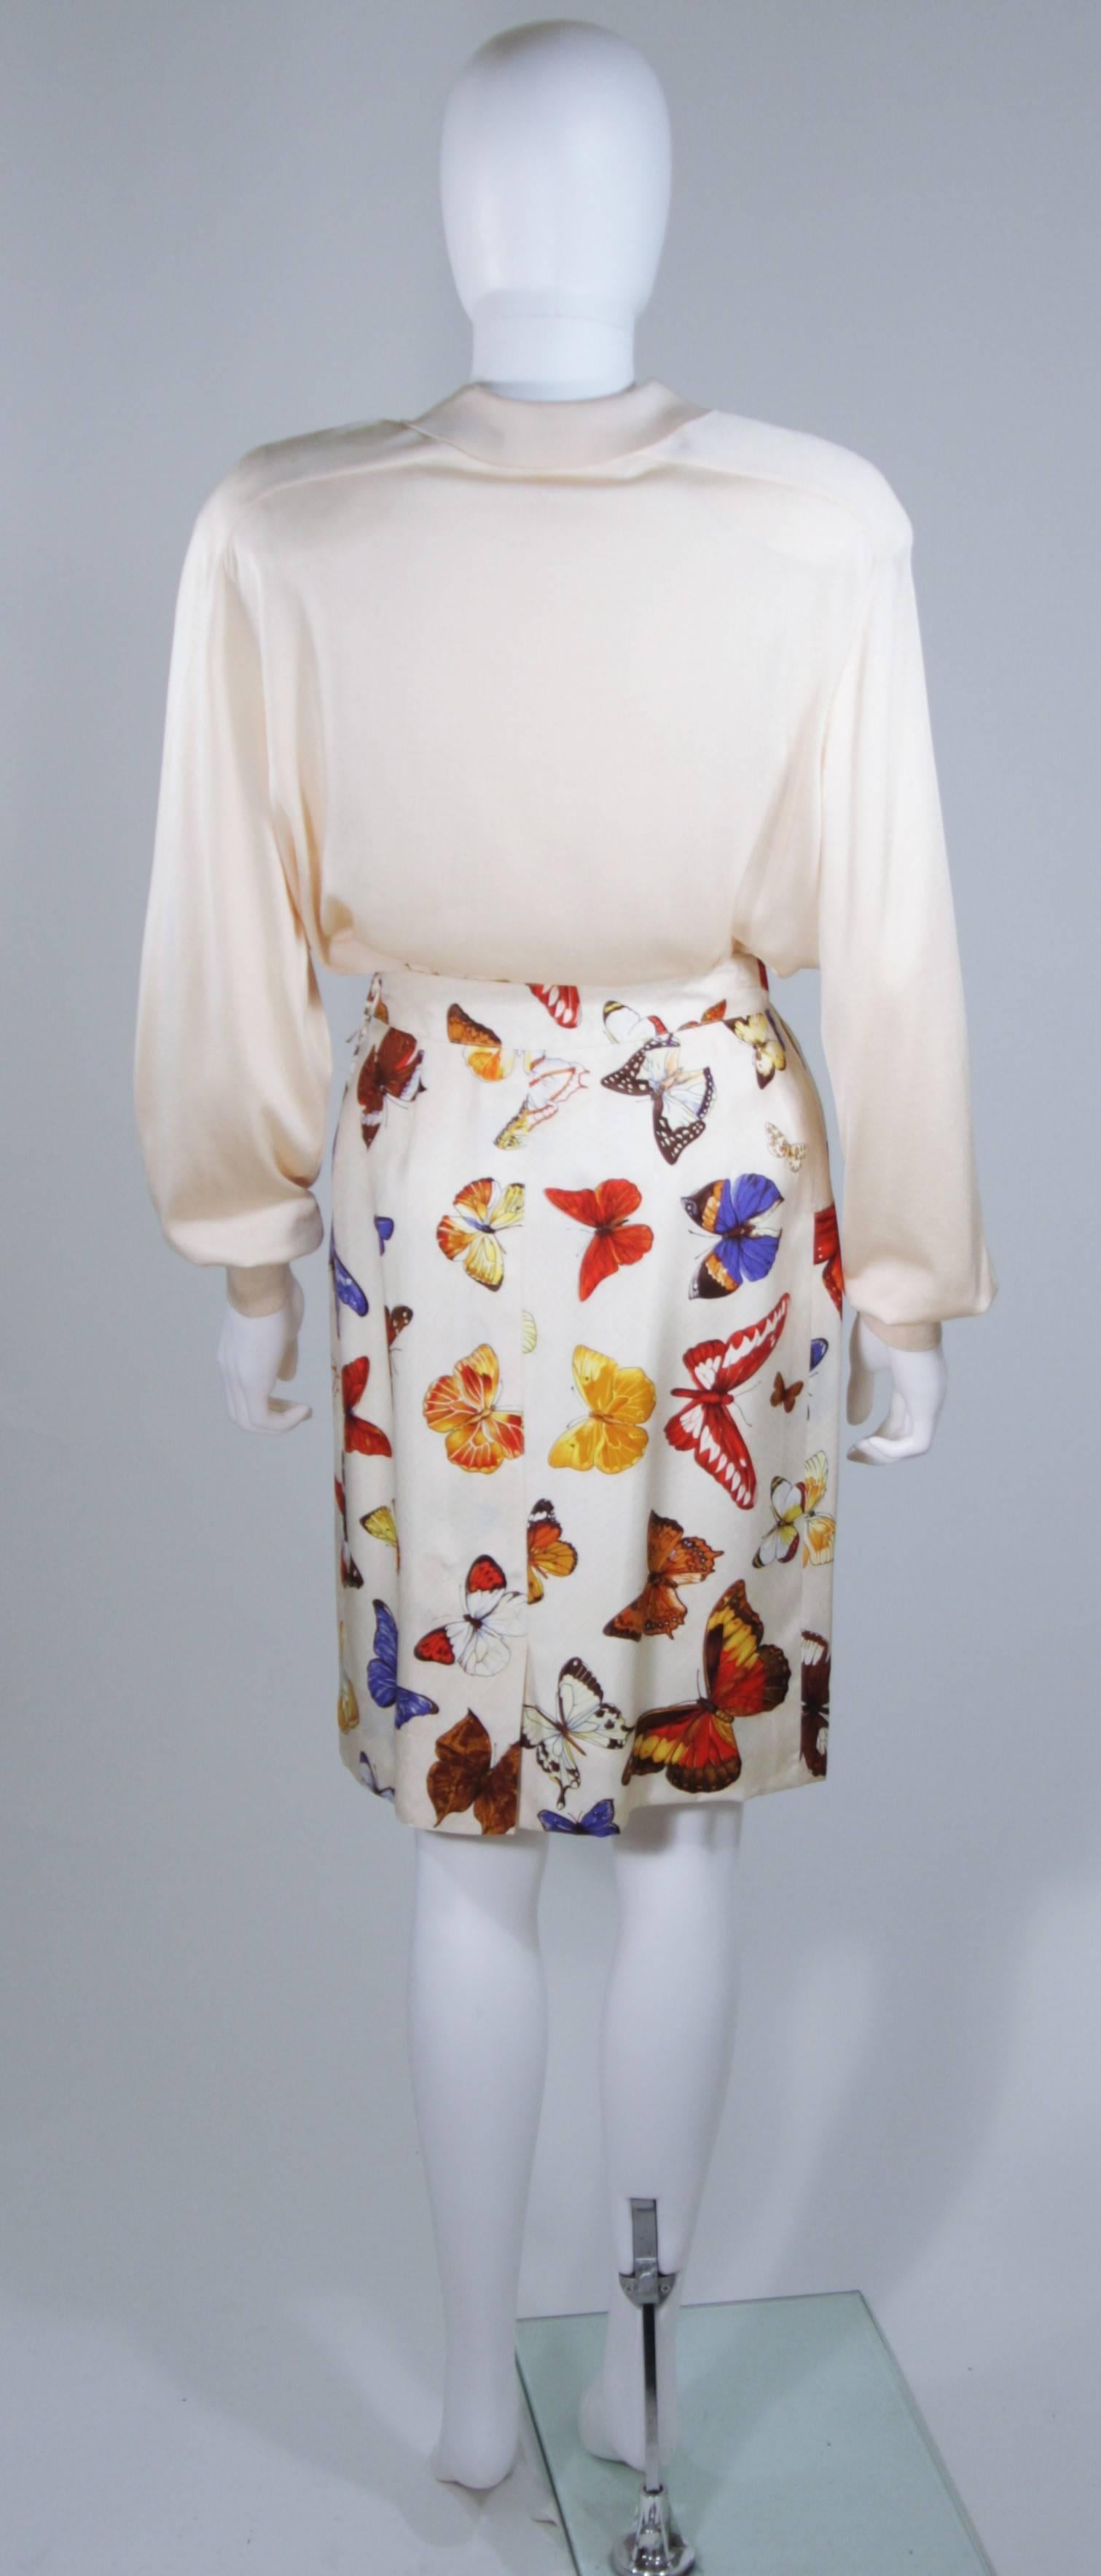 HERMES Cream Silk Butterfly Print Sweater and Skirt Set Size 42 38 1